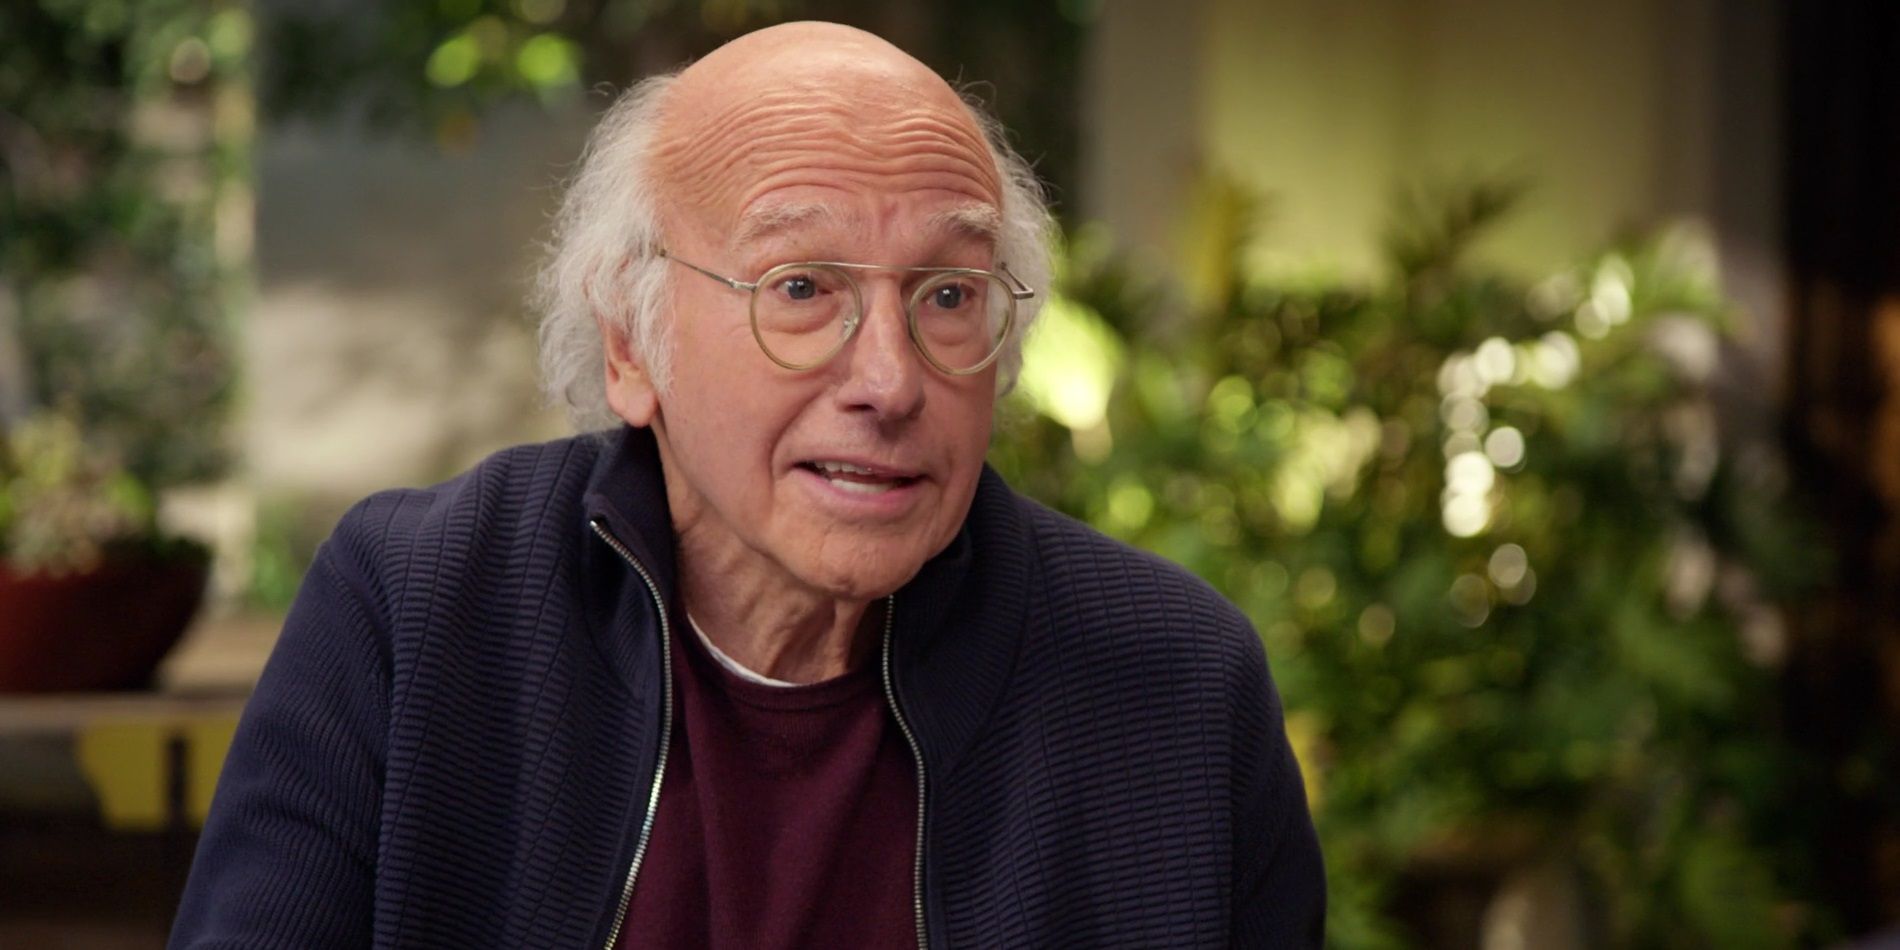 Larry doing a TV interview in Curb Your Enthusiasm